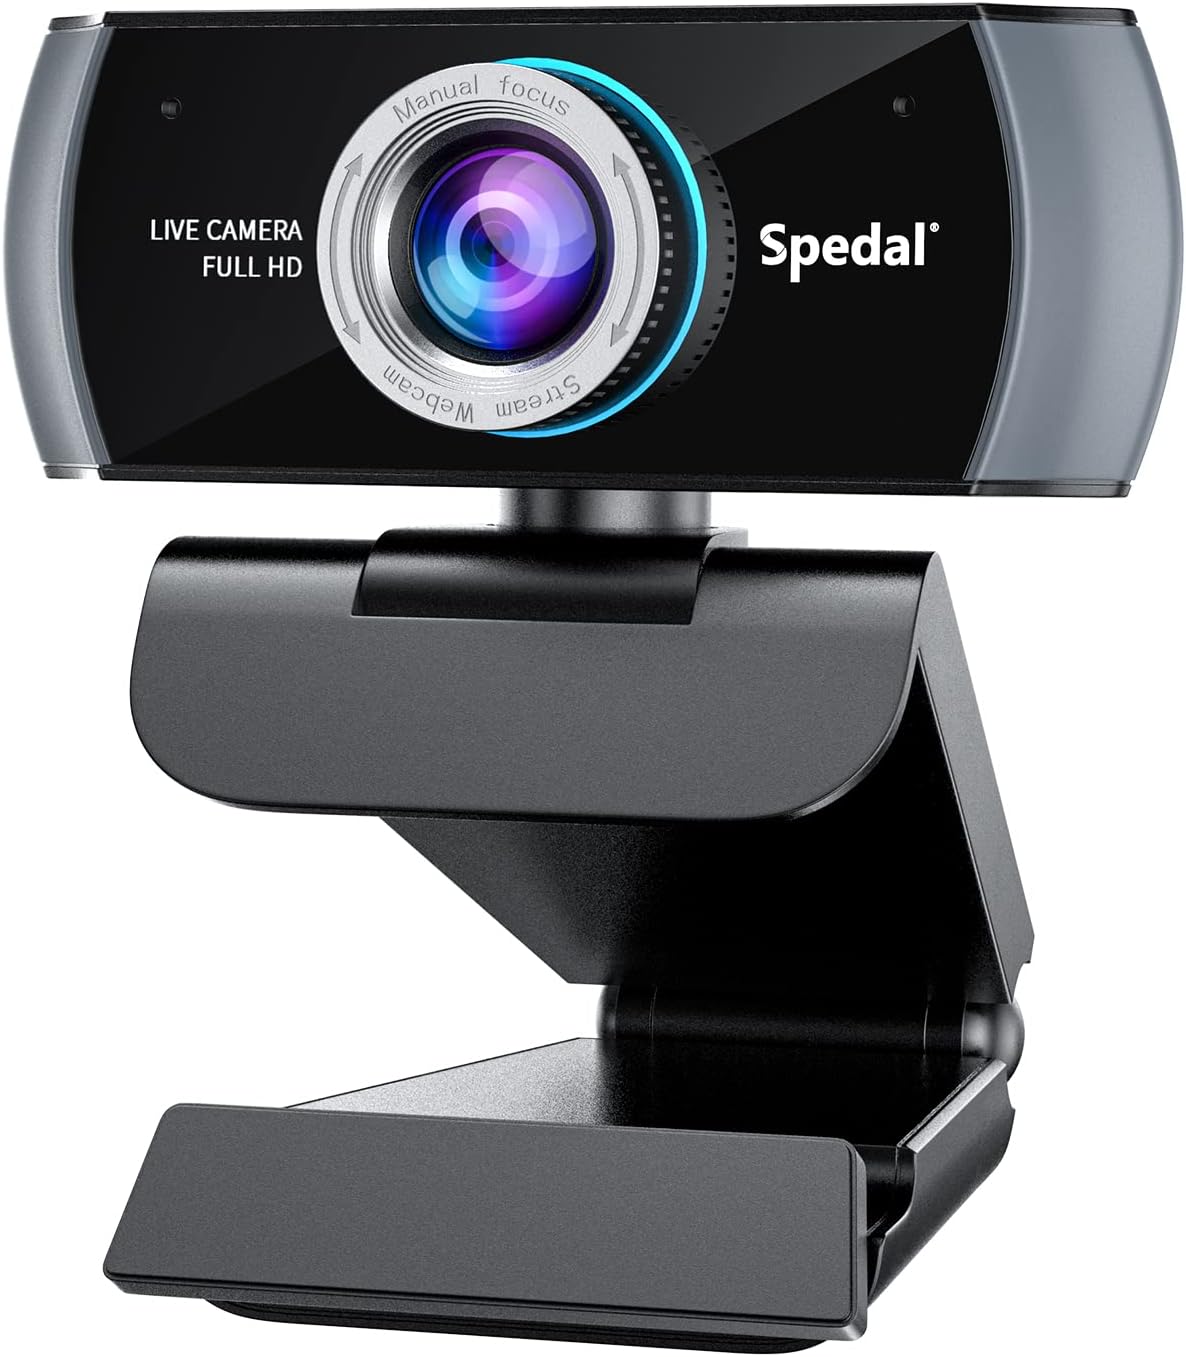 Hd Webcam 1080p with Microphone, USB Webcam for [...]